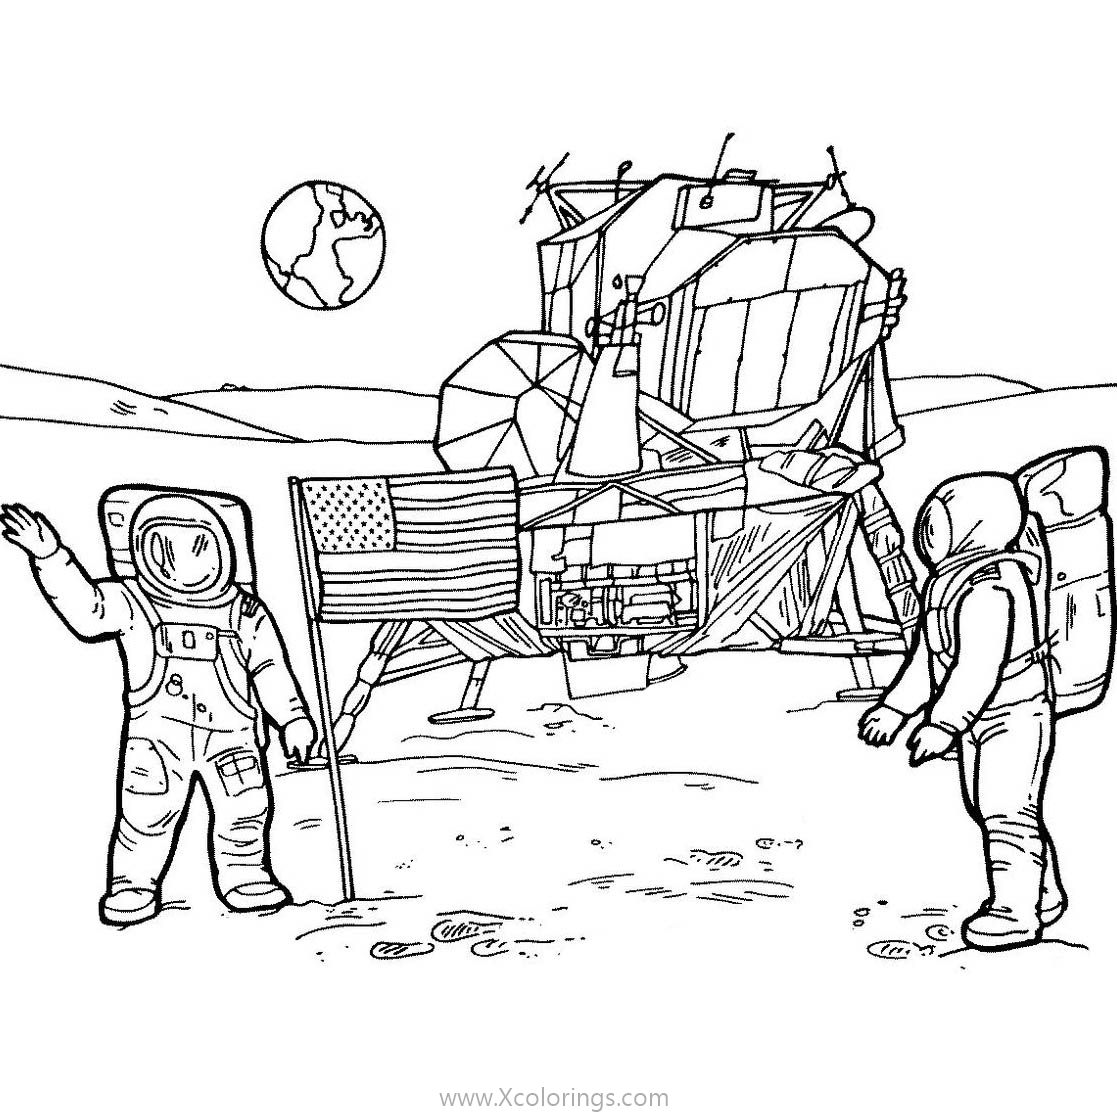 Free US Astronauts Landed On the Moon Coloring Pages printable